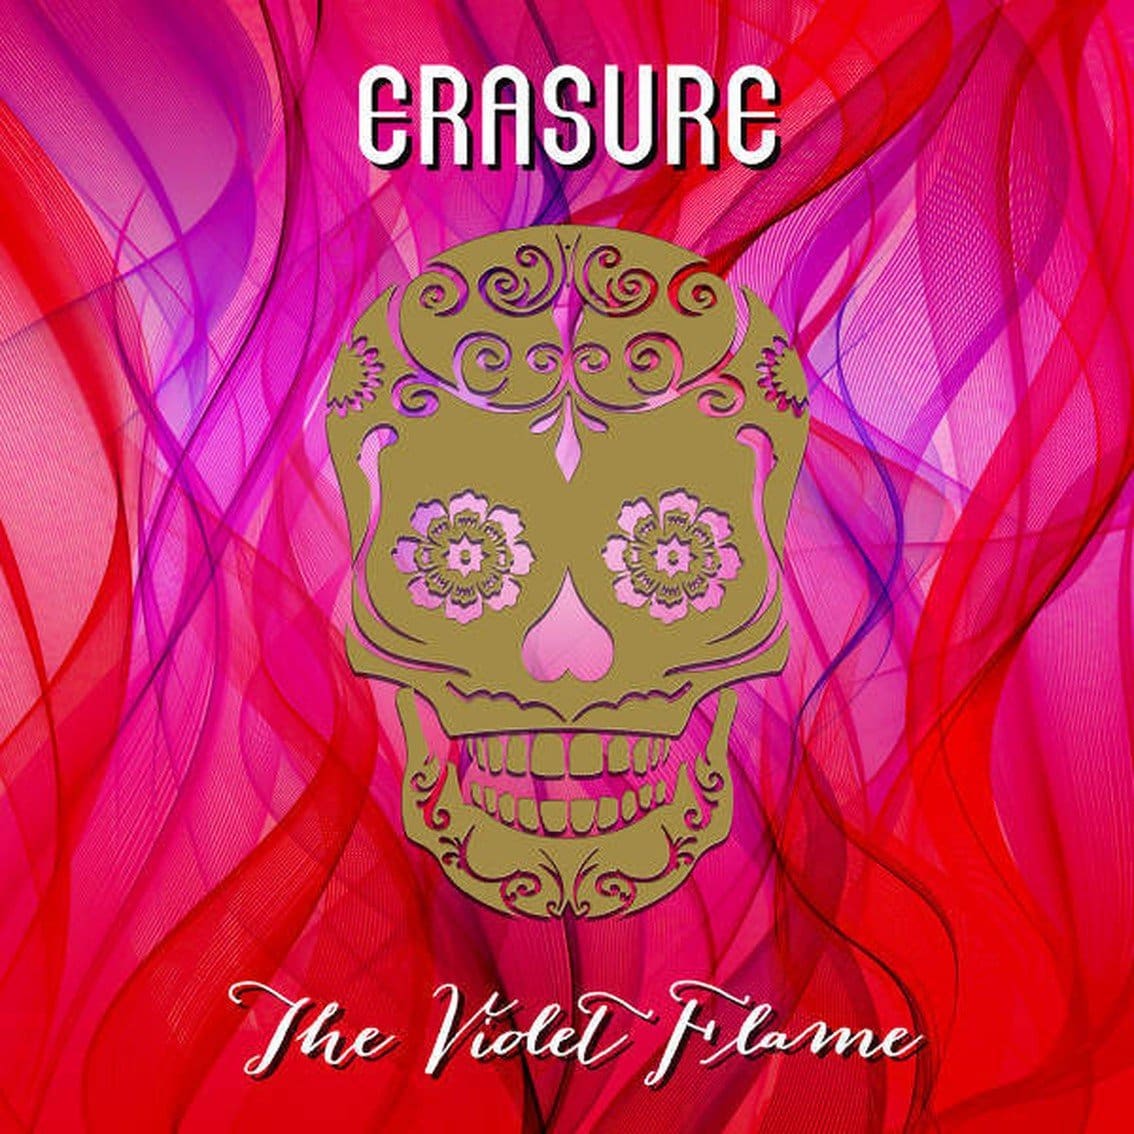 Erasure gets a special Greek 2CD edition of their 'The violet flame' album with bonus tracks - 500 copies only, order now